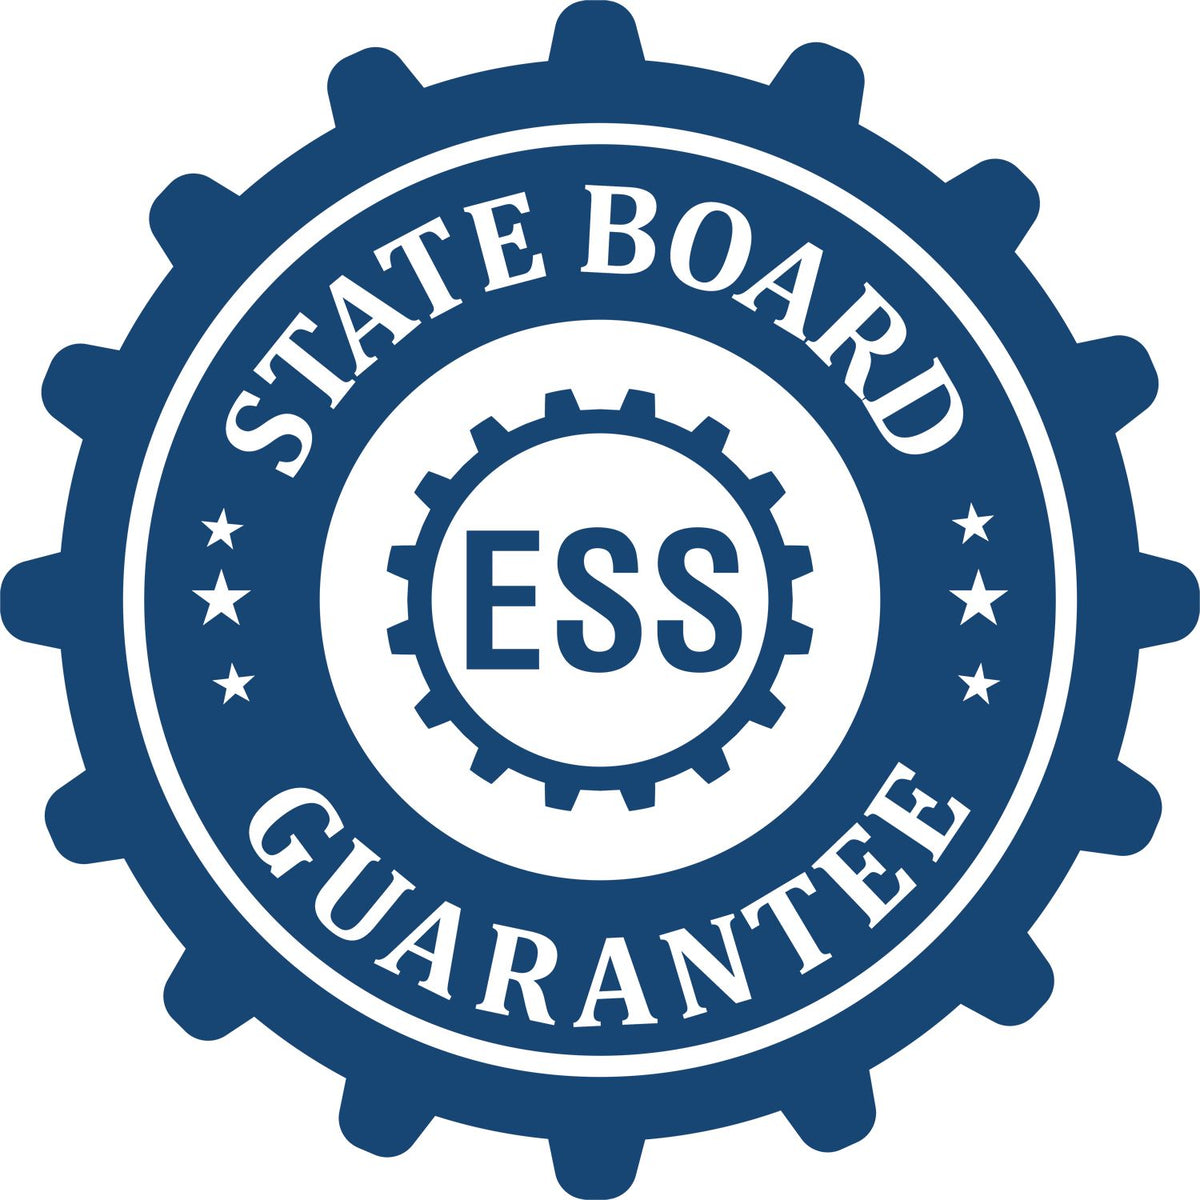 An emblem in a gear shape illustrating a state board guarantee for the Wooden Handle Pennsylvania Rectangular Notary Public Stamp product.